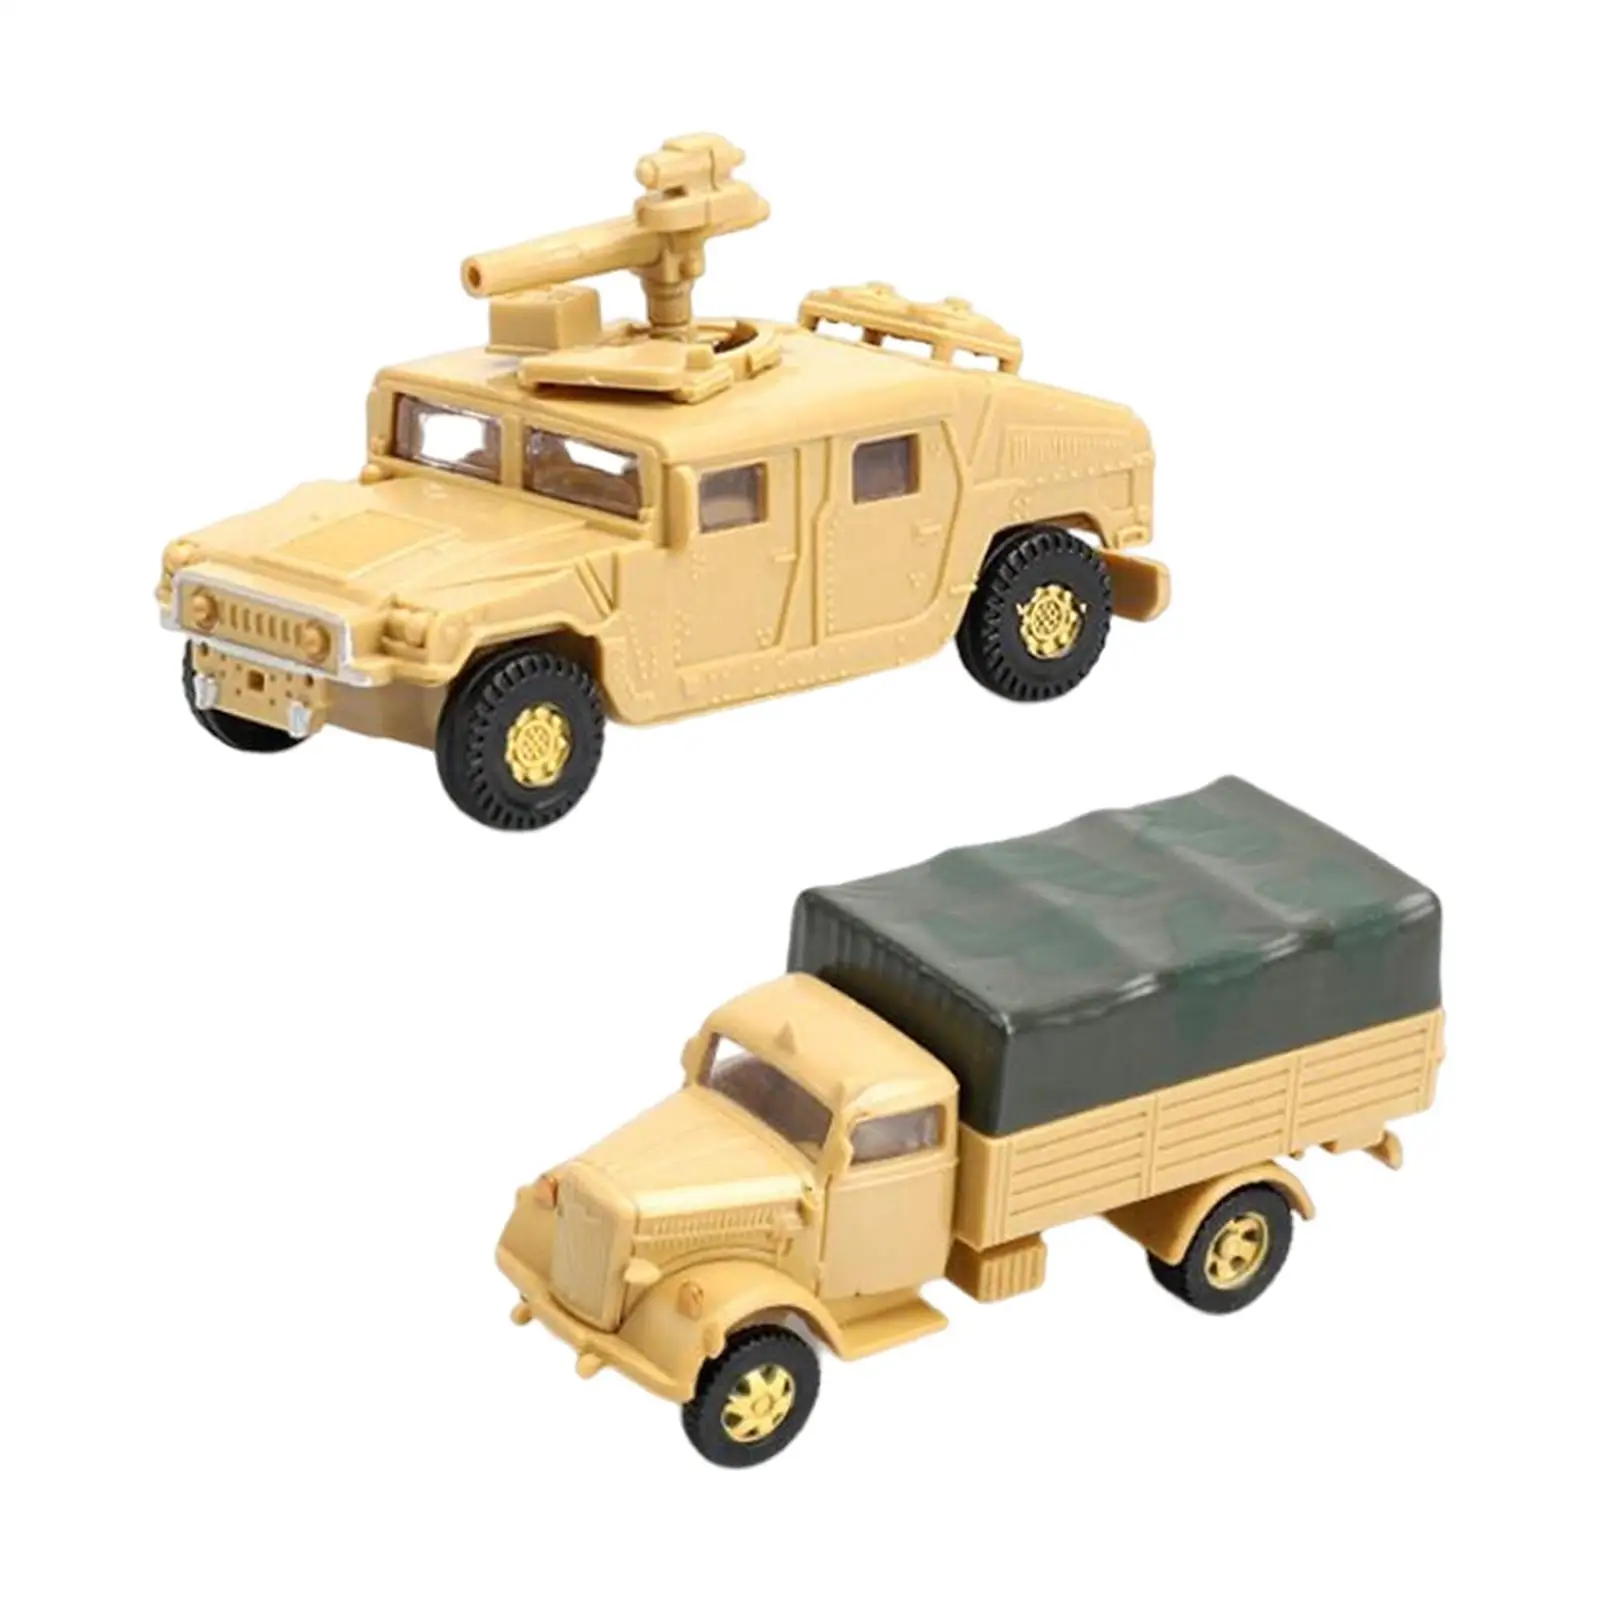 2Pcs Assembly Model Toy Car Transport Carrier Truck Playset Decorative Vehicle